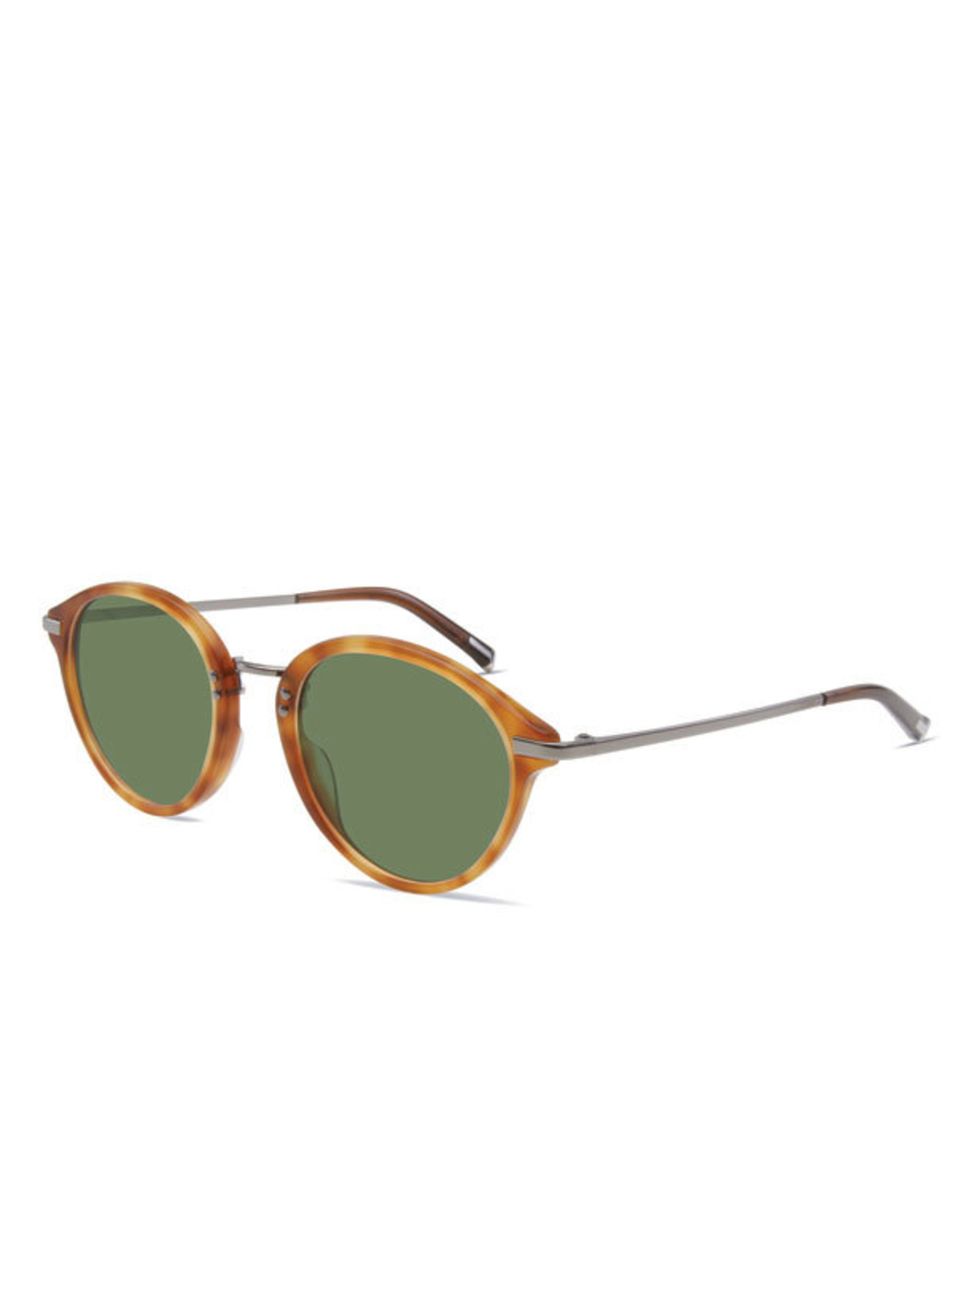 <p>Round tortoiseshell sunglasses, £225, by Calvin Klein Classic Collection (0800 722 020)</p>